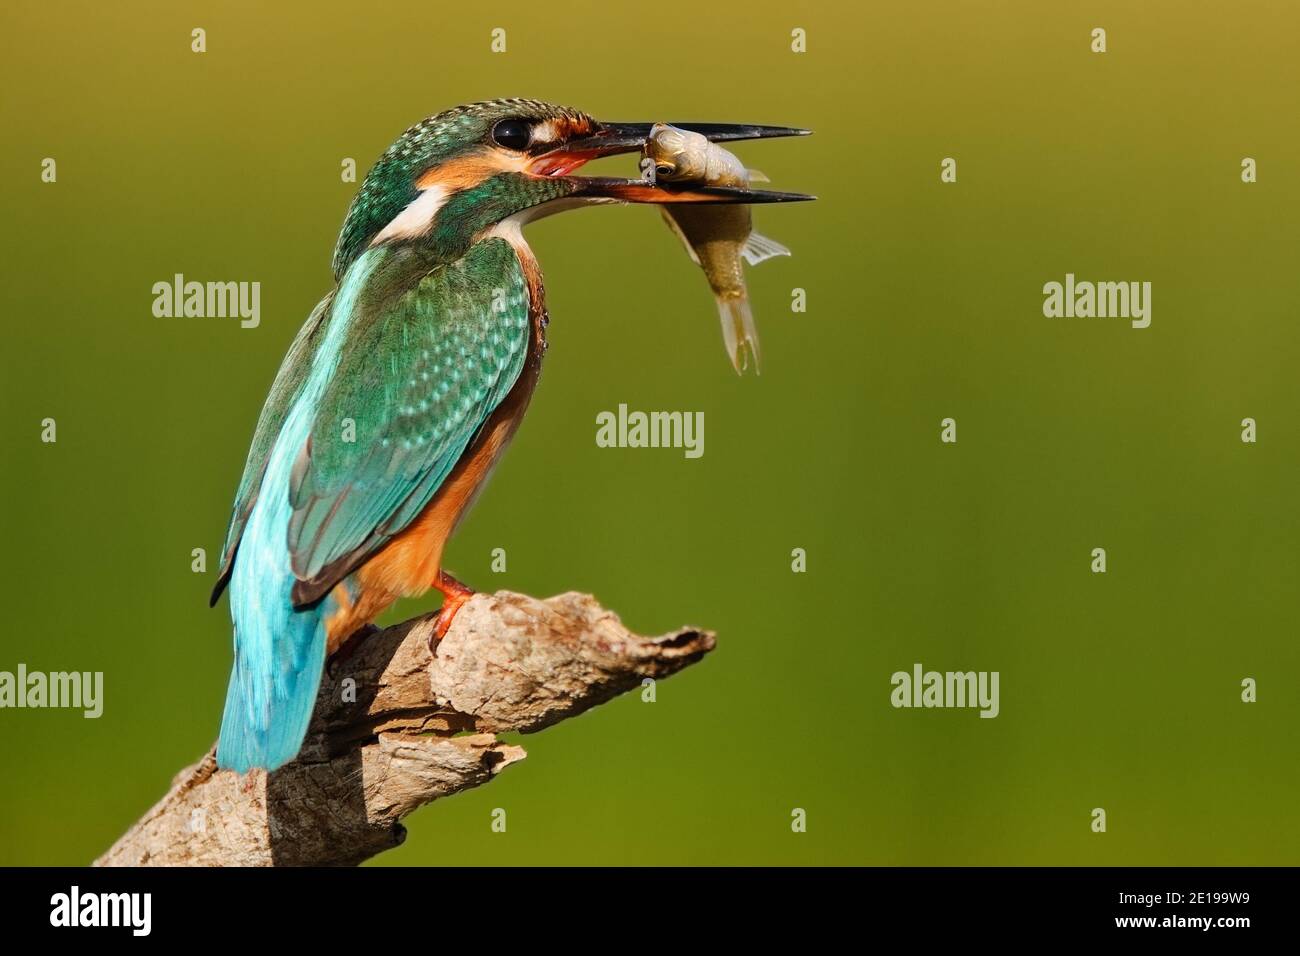 Common Kingfisher (Alcedo atthis) with a big fish in its beak. Stock Photo